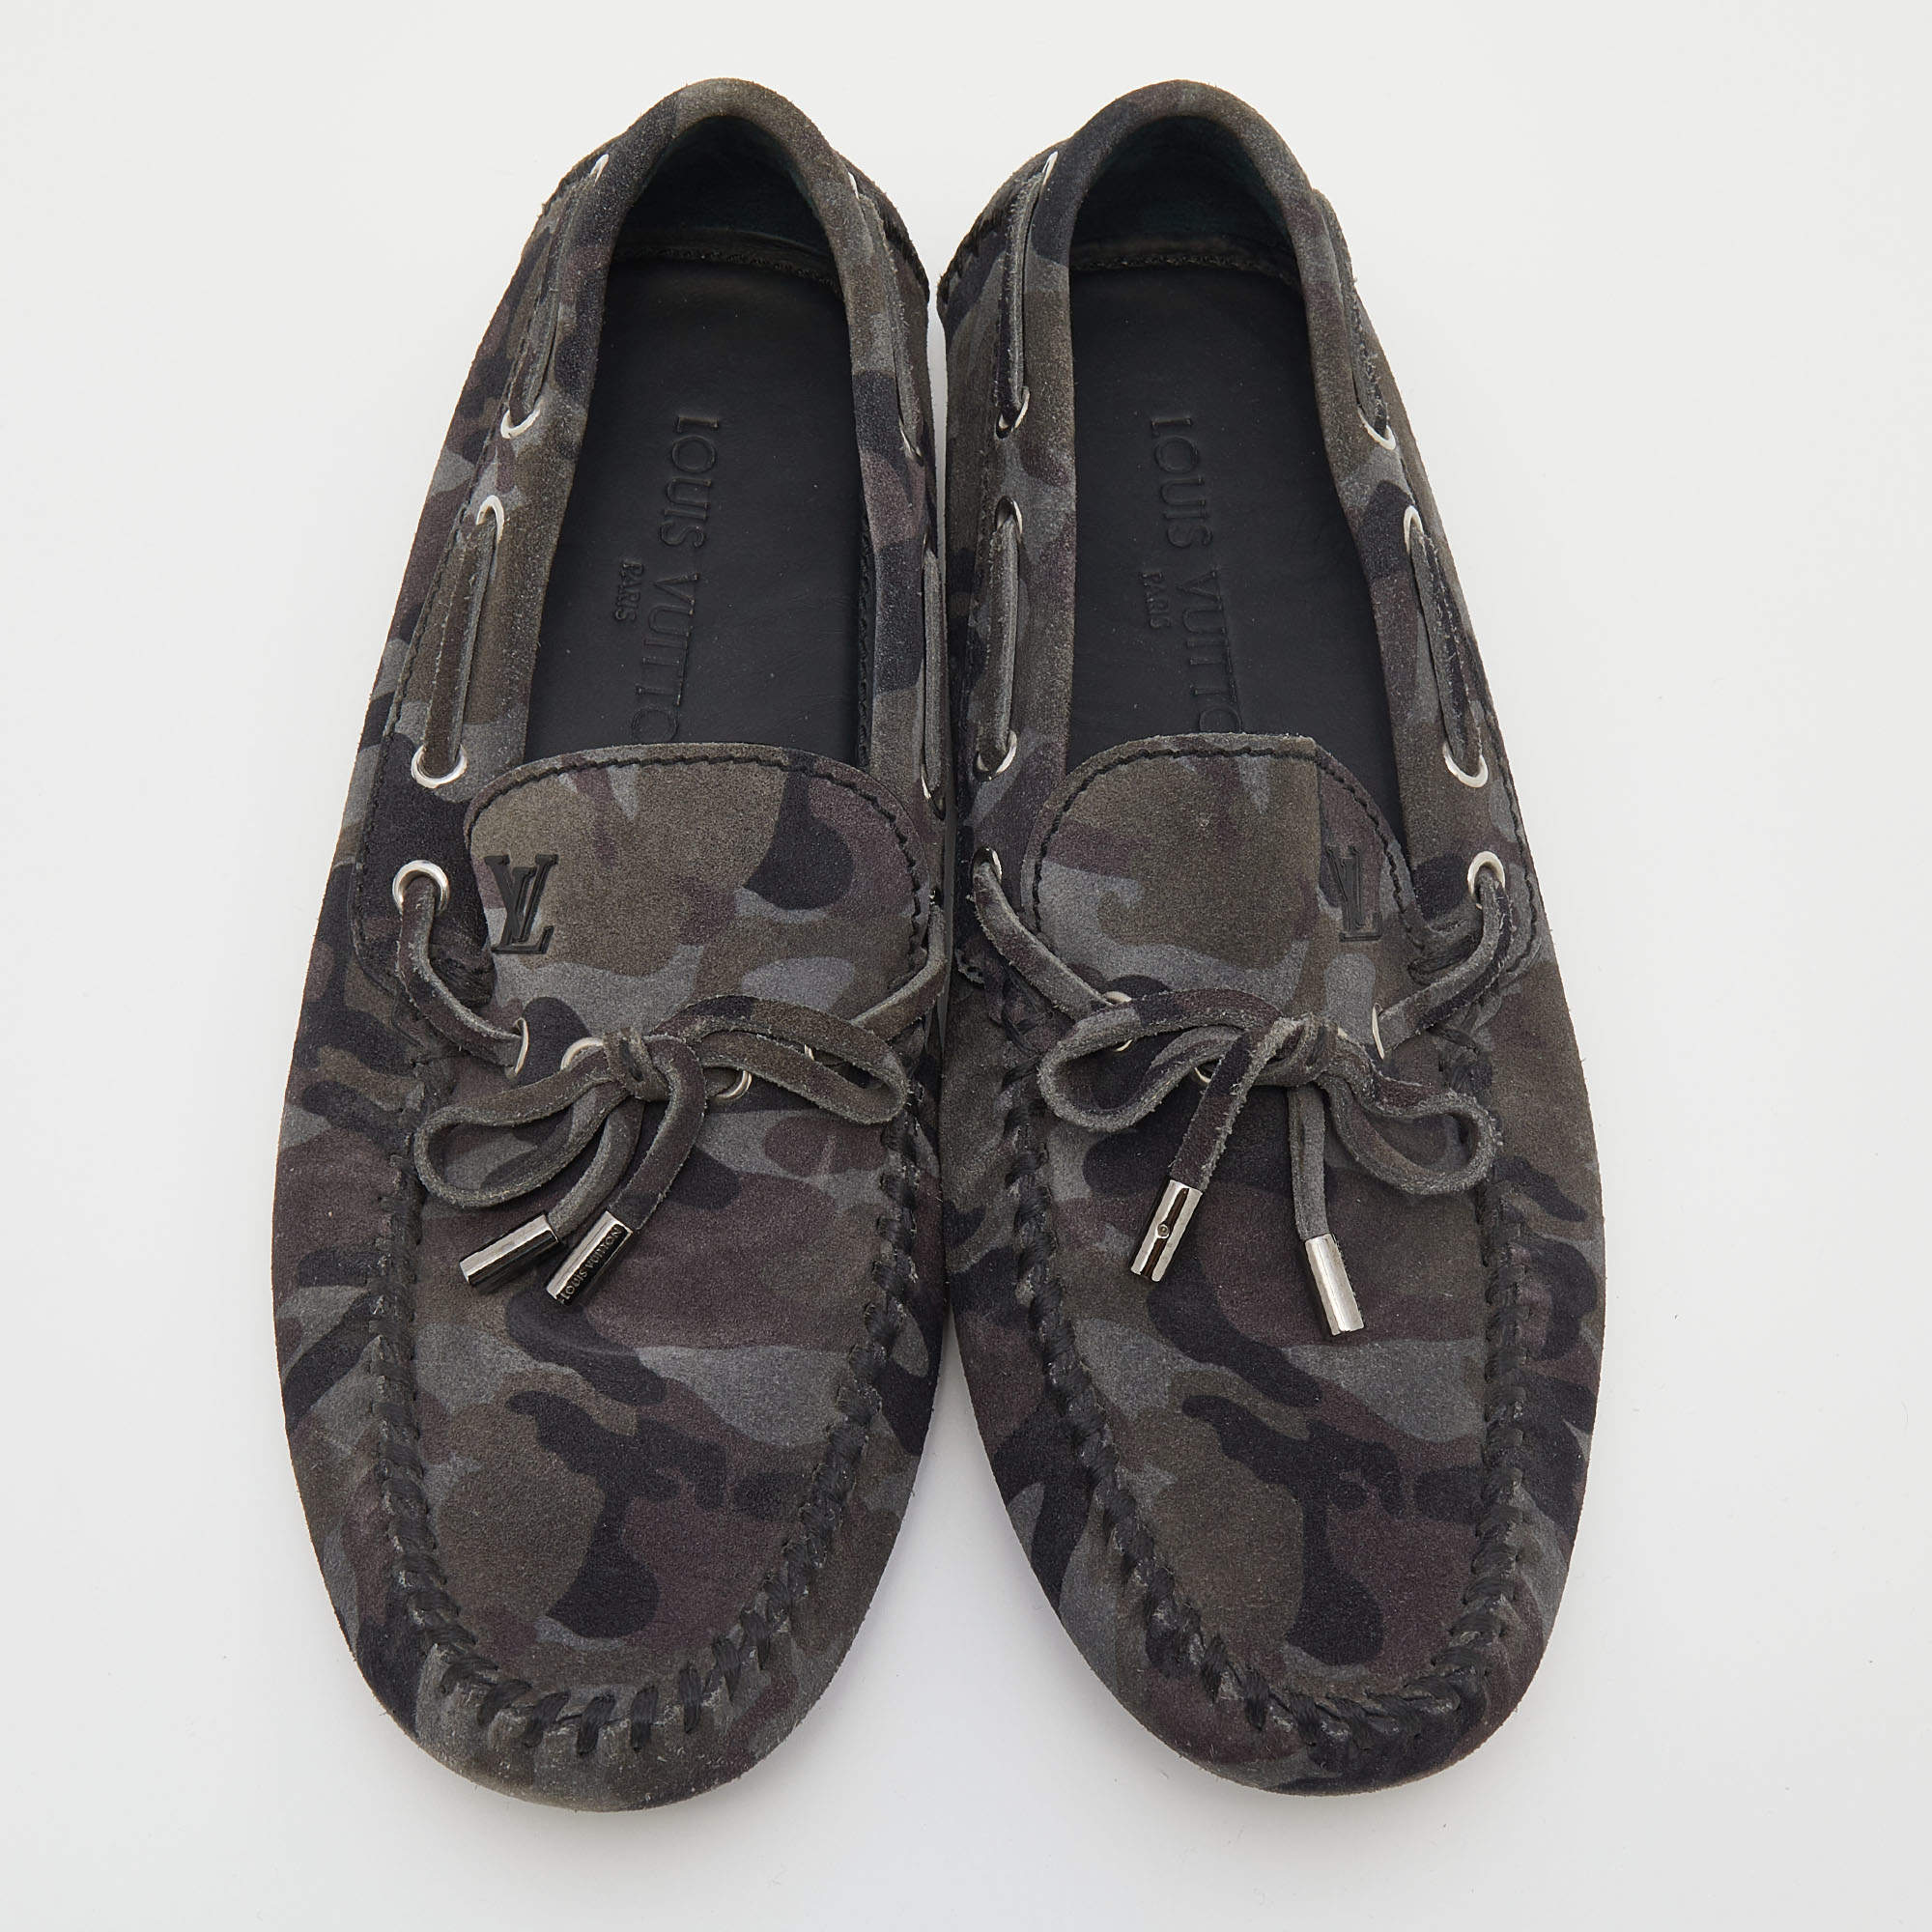 LOUIS VUITTON Monogram tapestry LV Loafer Shoes 11 Camouflage unused 78061